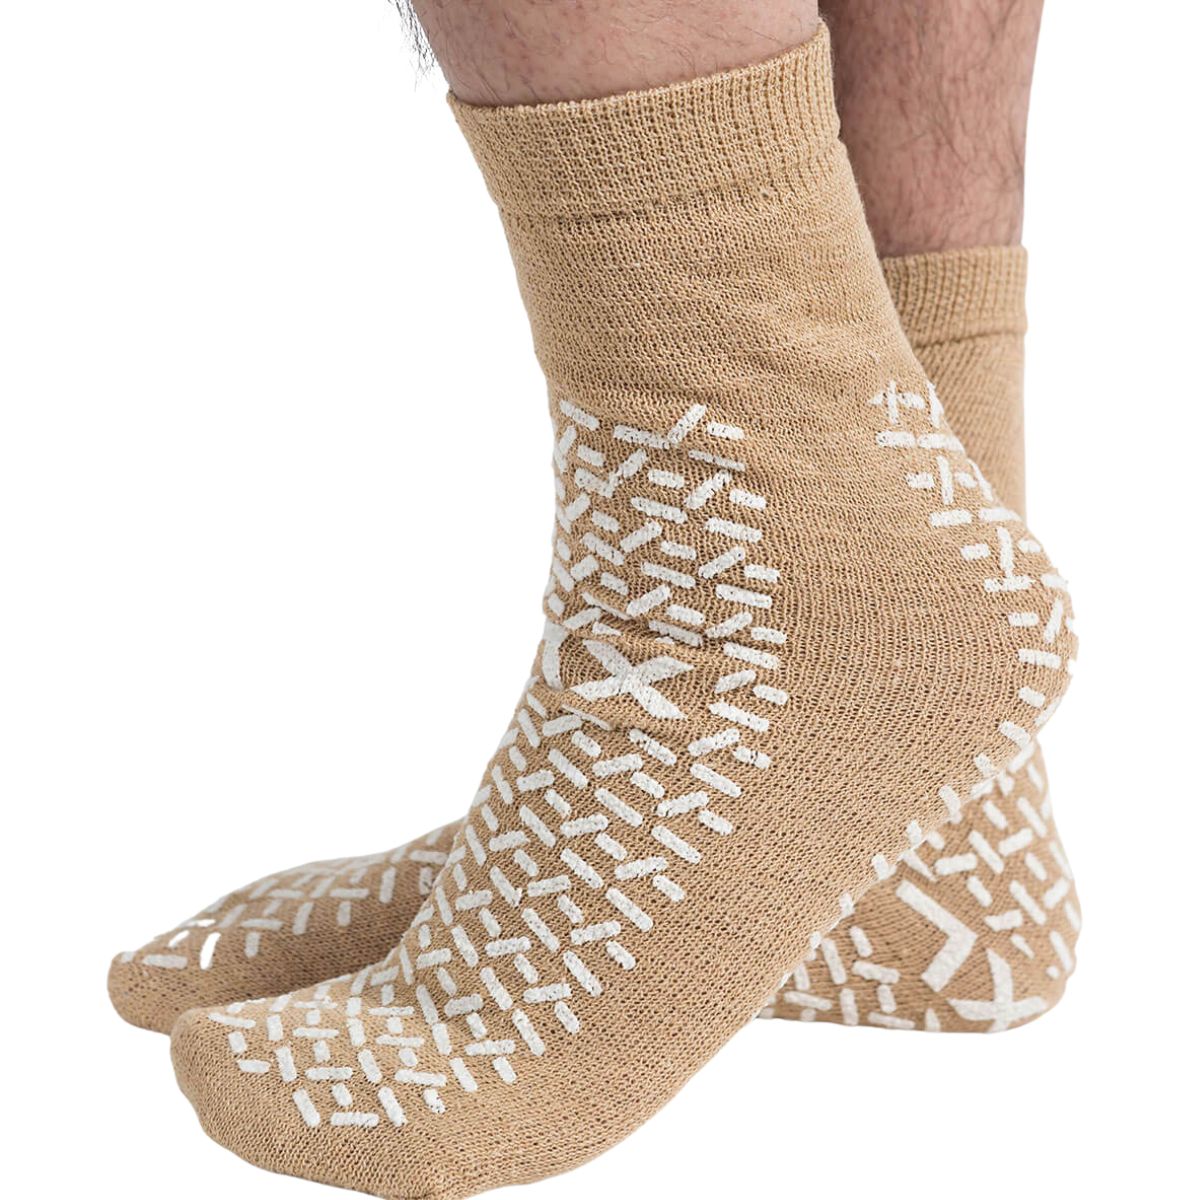 3 Pairs of Super Wide Socks With Non-Skid Grips for Swollen Feet